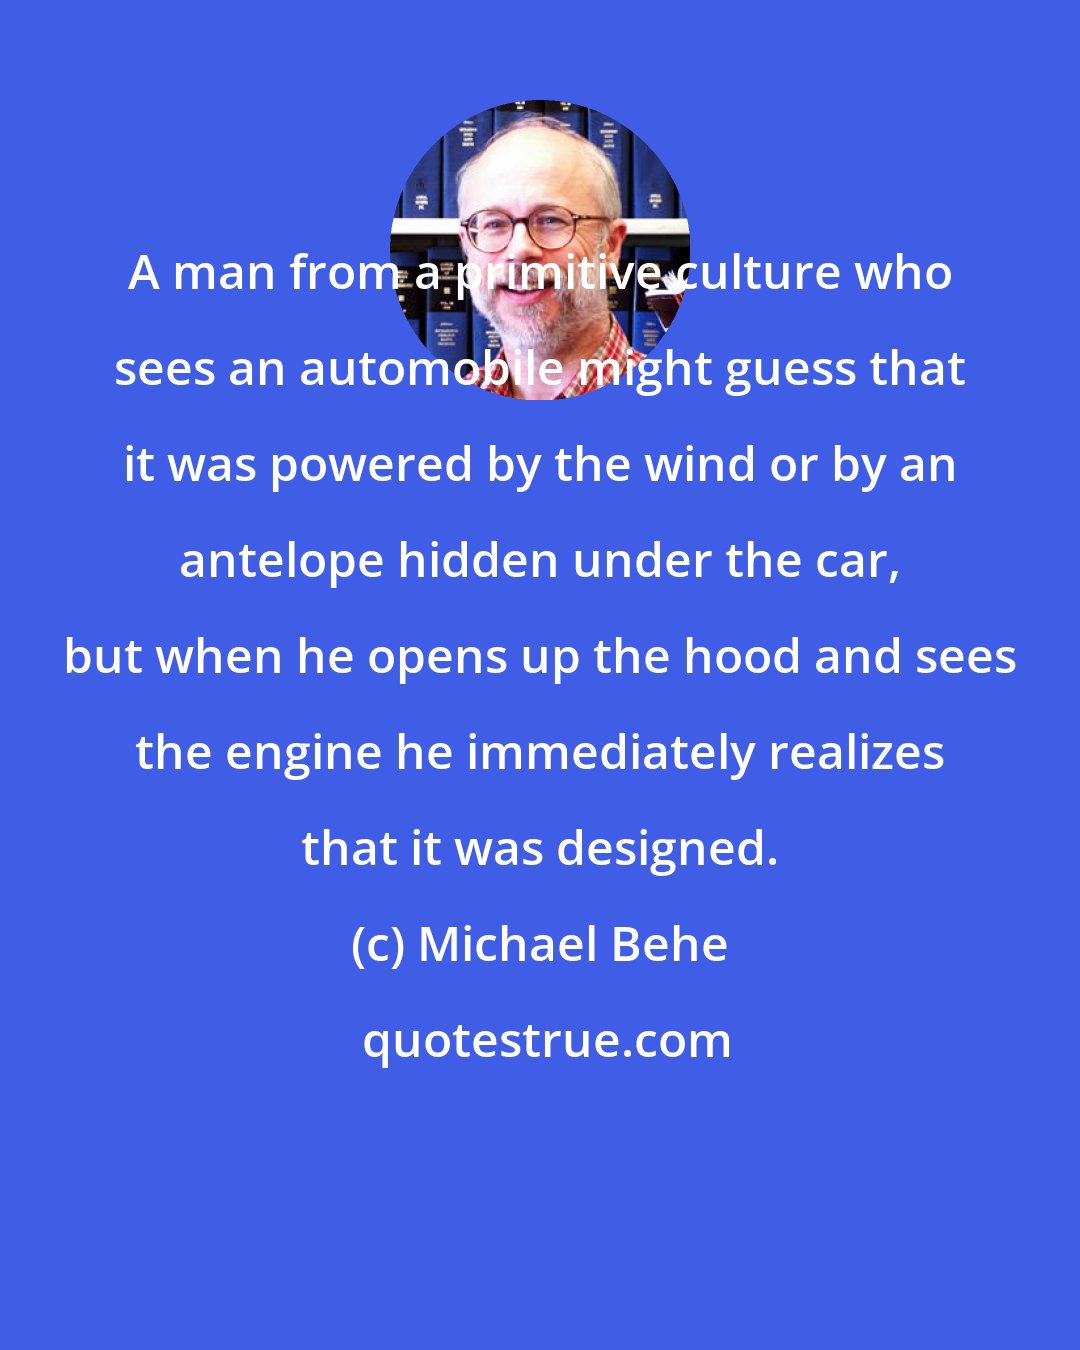 Michael Behe: A man from a primitive culture who sees an automobile might guess that it was powered by the wind or by an antelope hidden under the car, but when he opens up the hood and sees the engine he immediately realizes that it was designed.